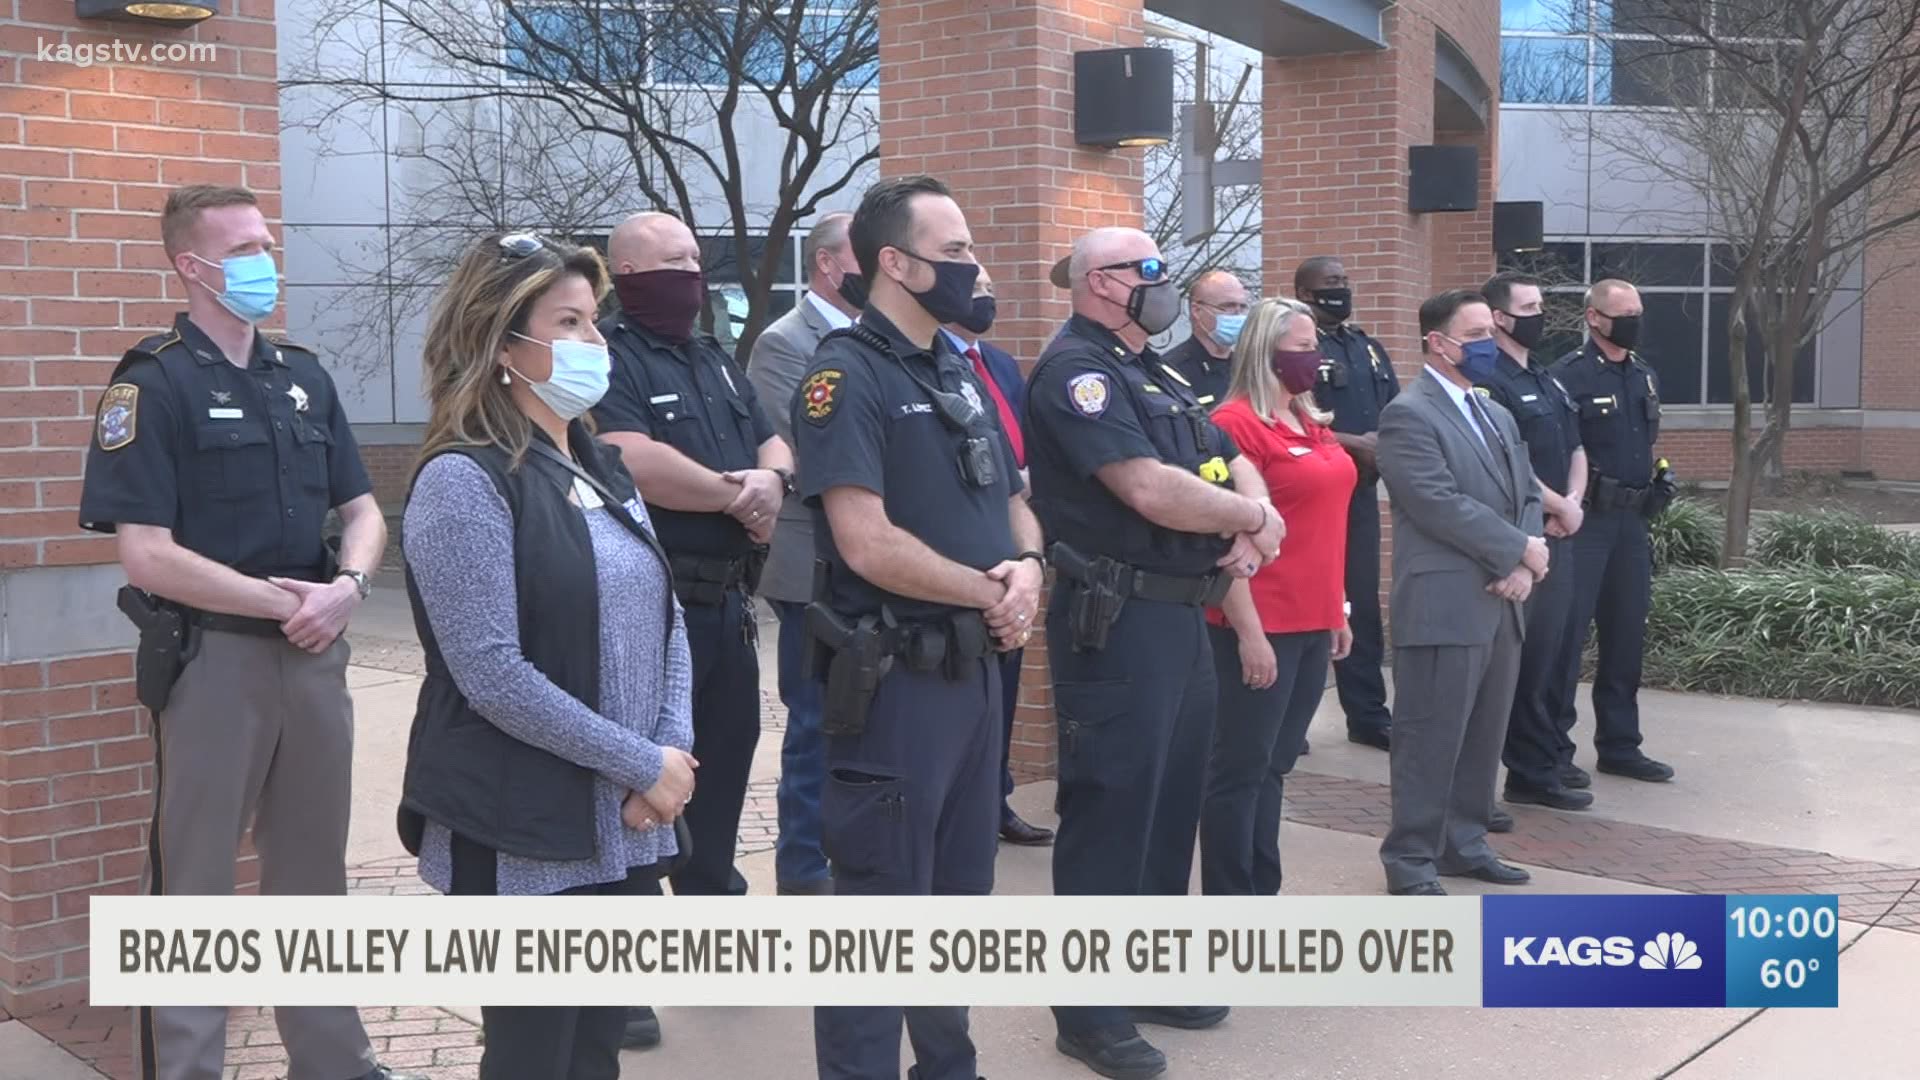 Law enforcement will show zero tolerance for those who drive drunk this weekend.